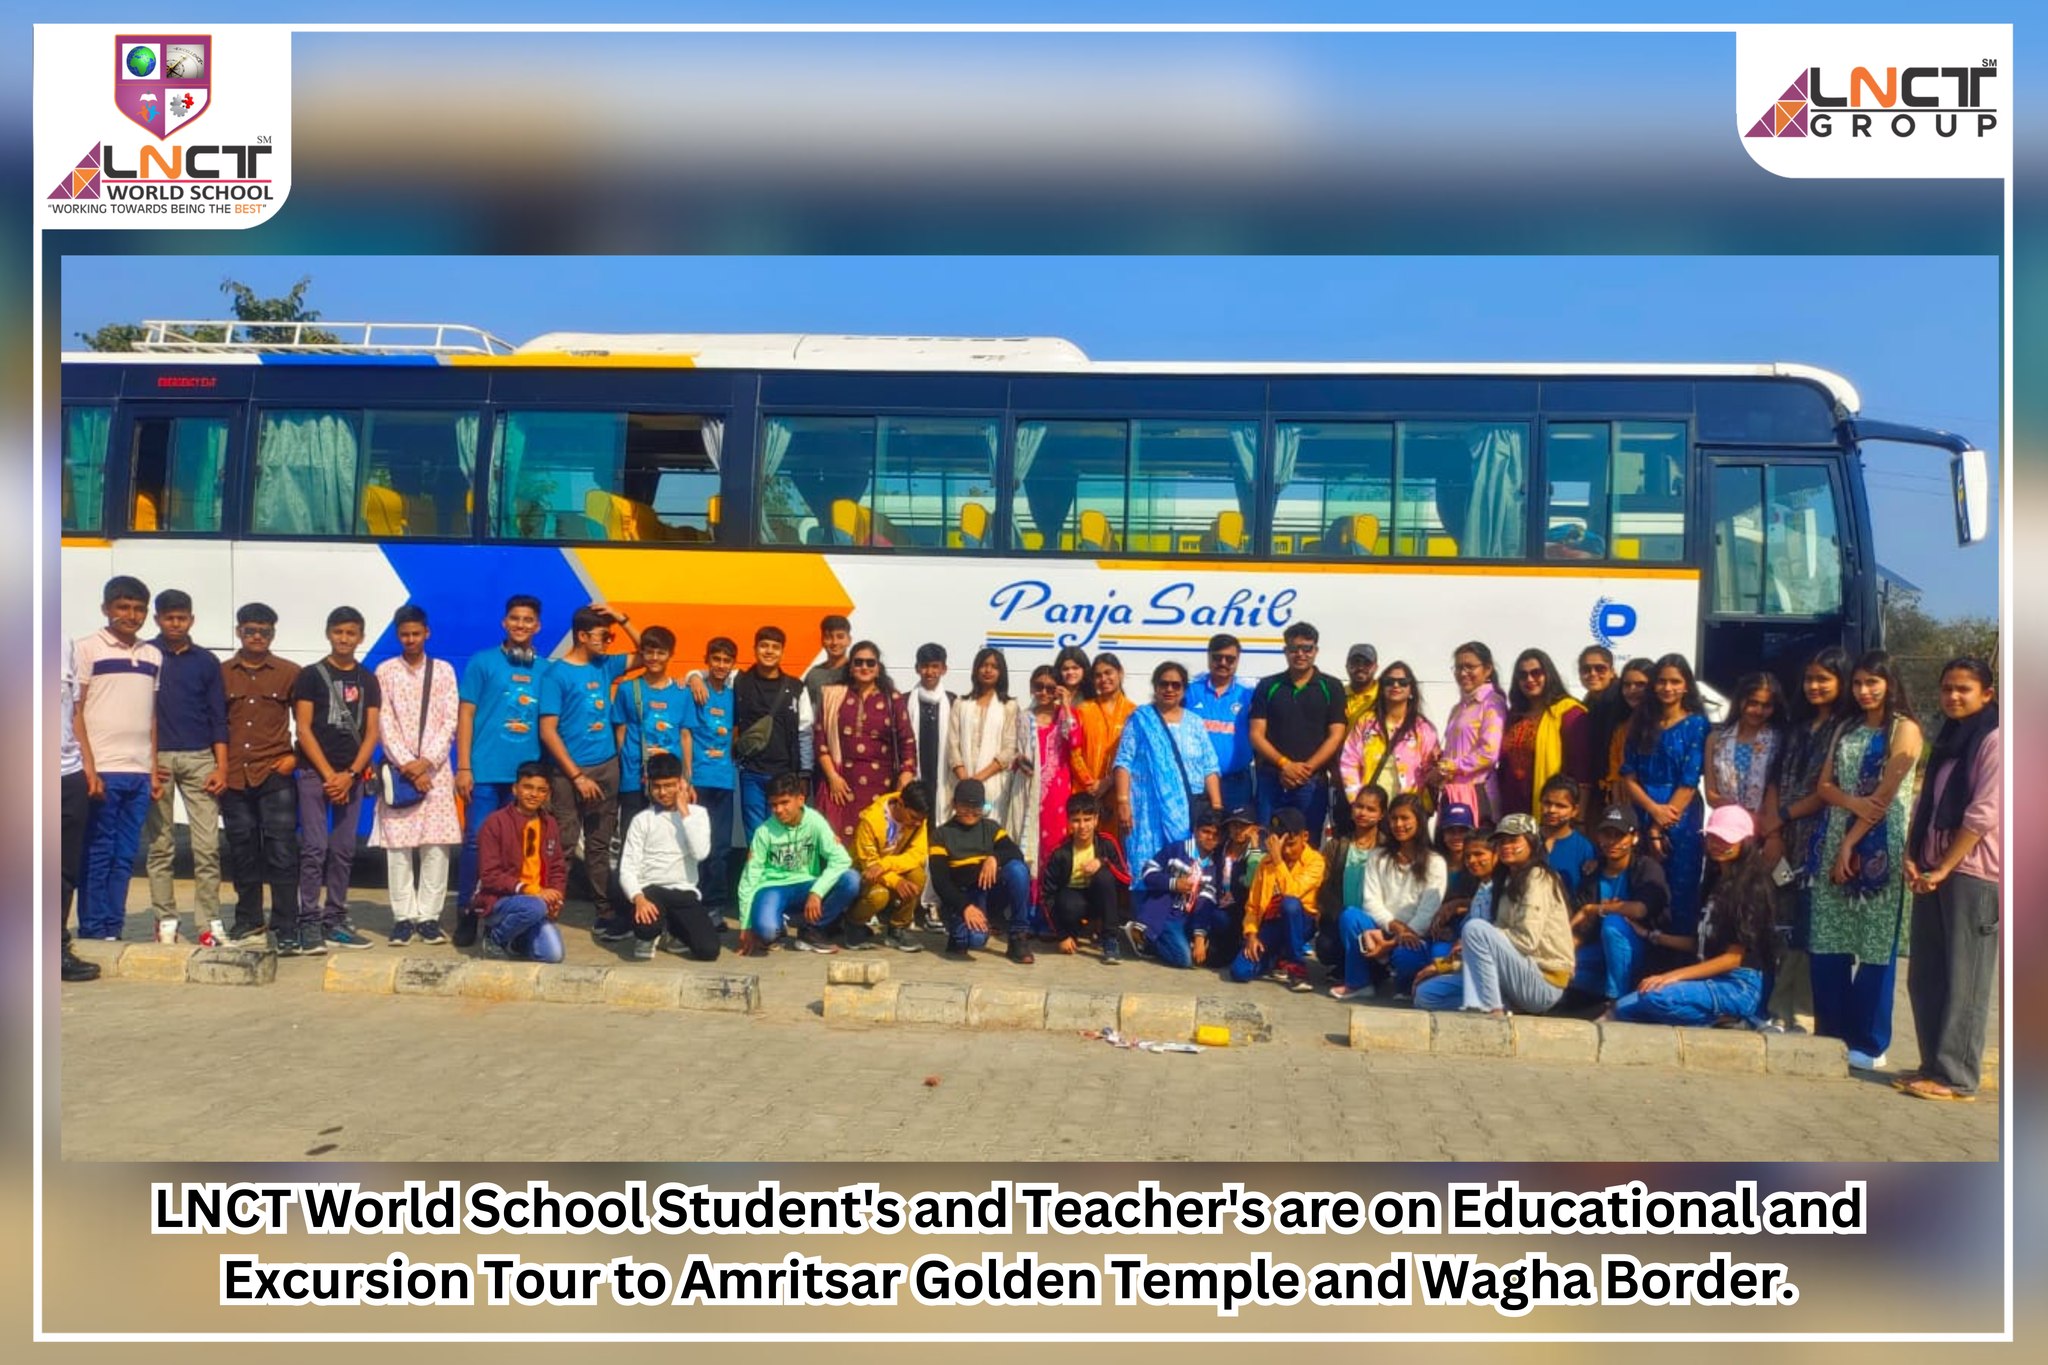 Picnic LNCT World School’s Educational Excursion to Amritsar Golden Temple and Wagah Border 